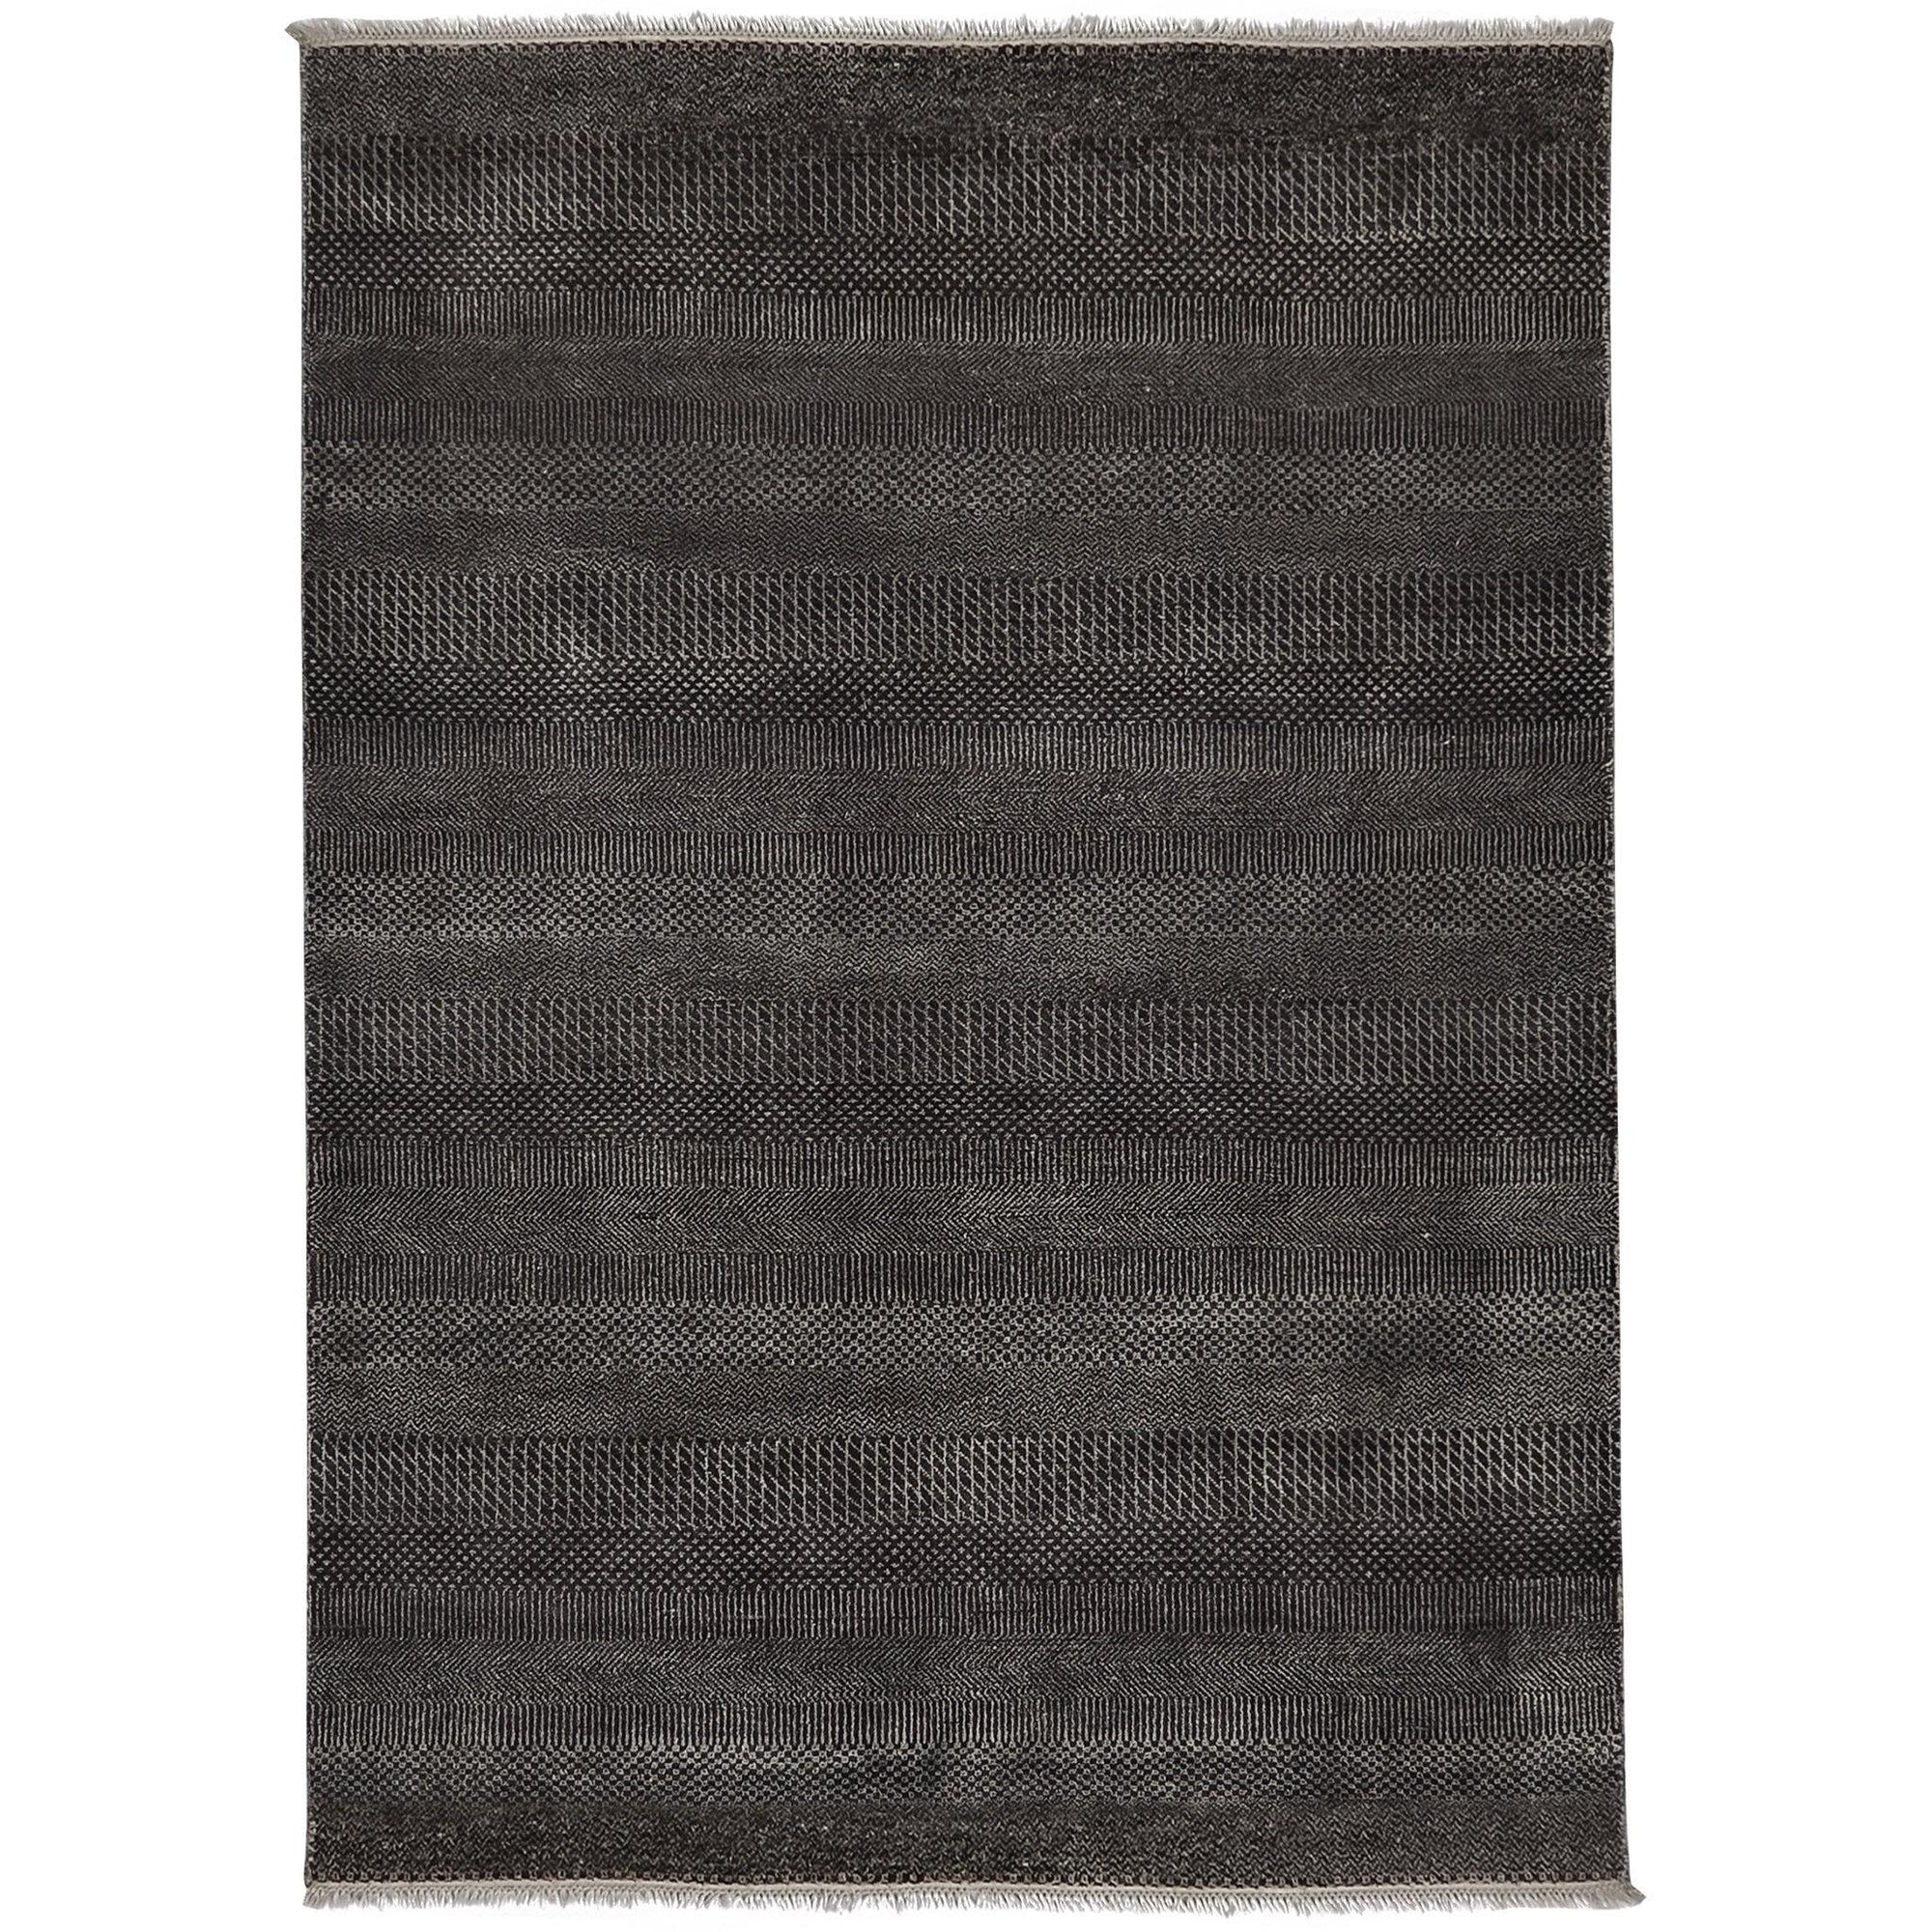 Contemporary Hand-knotted Wool Rug 156cm x 220cm